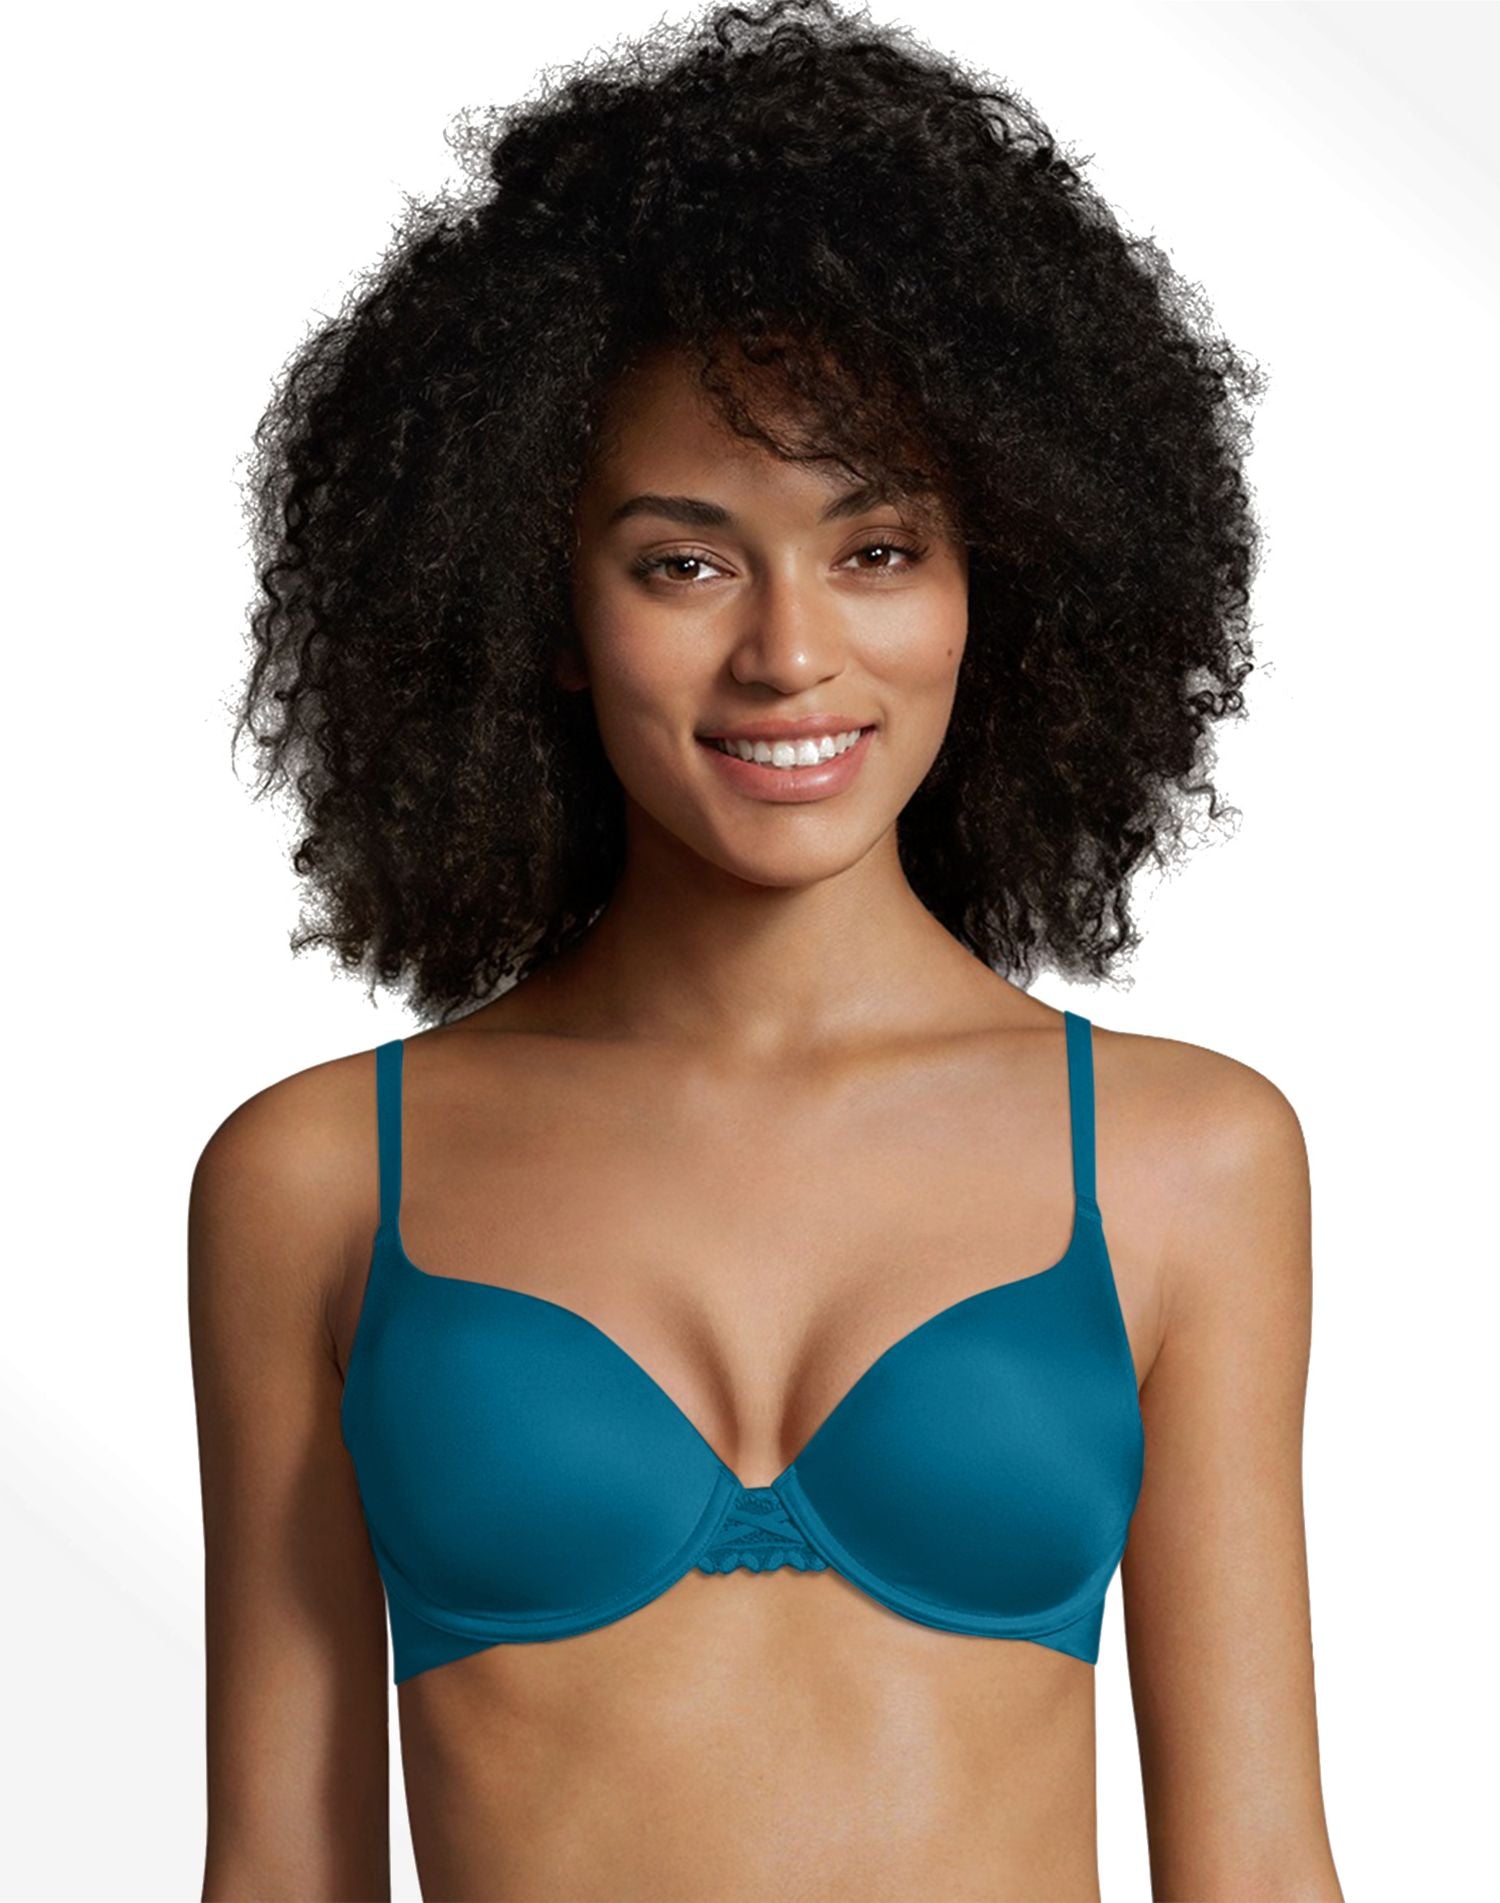 Maidenform Love the Lift Push Up & In Demi Bra White/Blue Whimsy 34A  Women's 